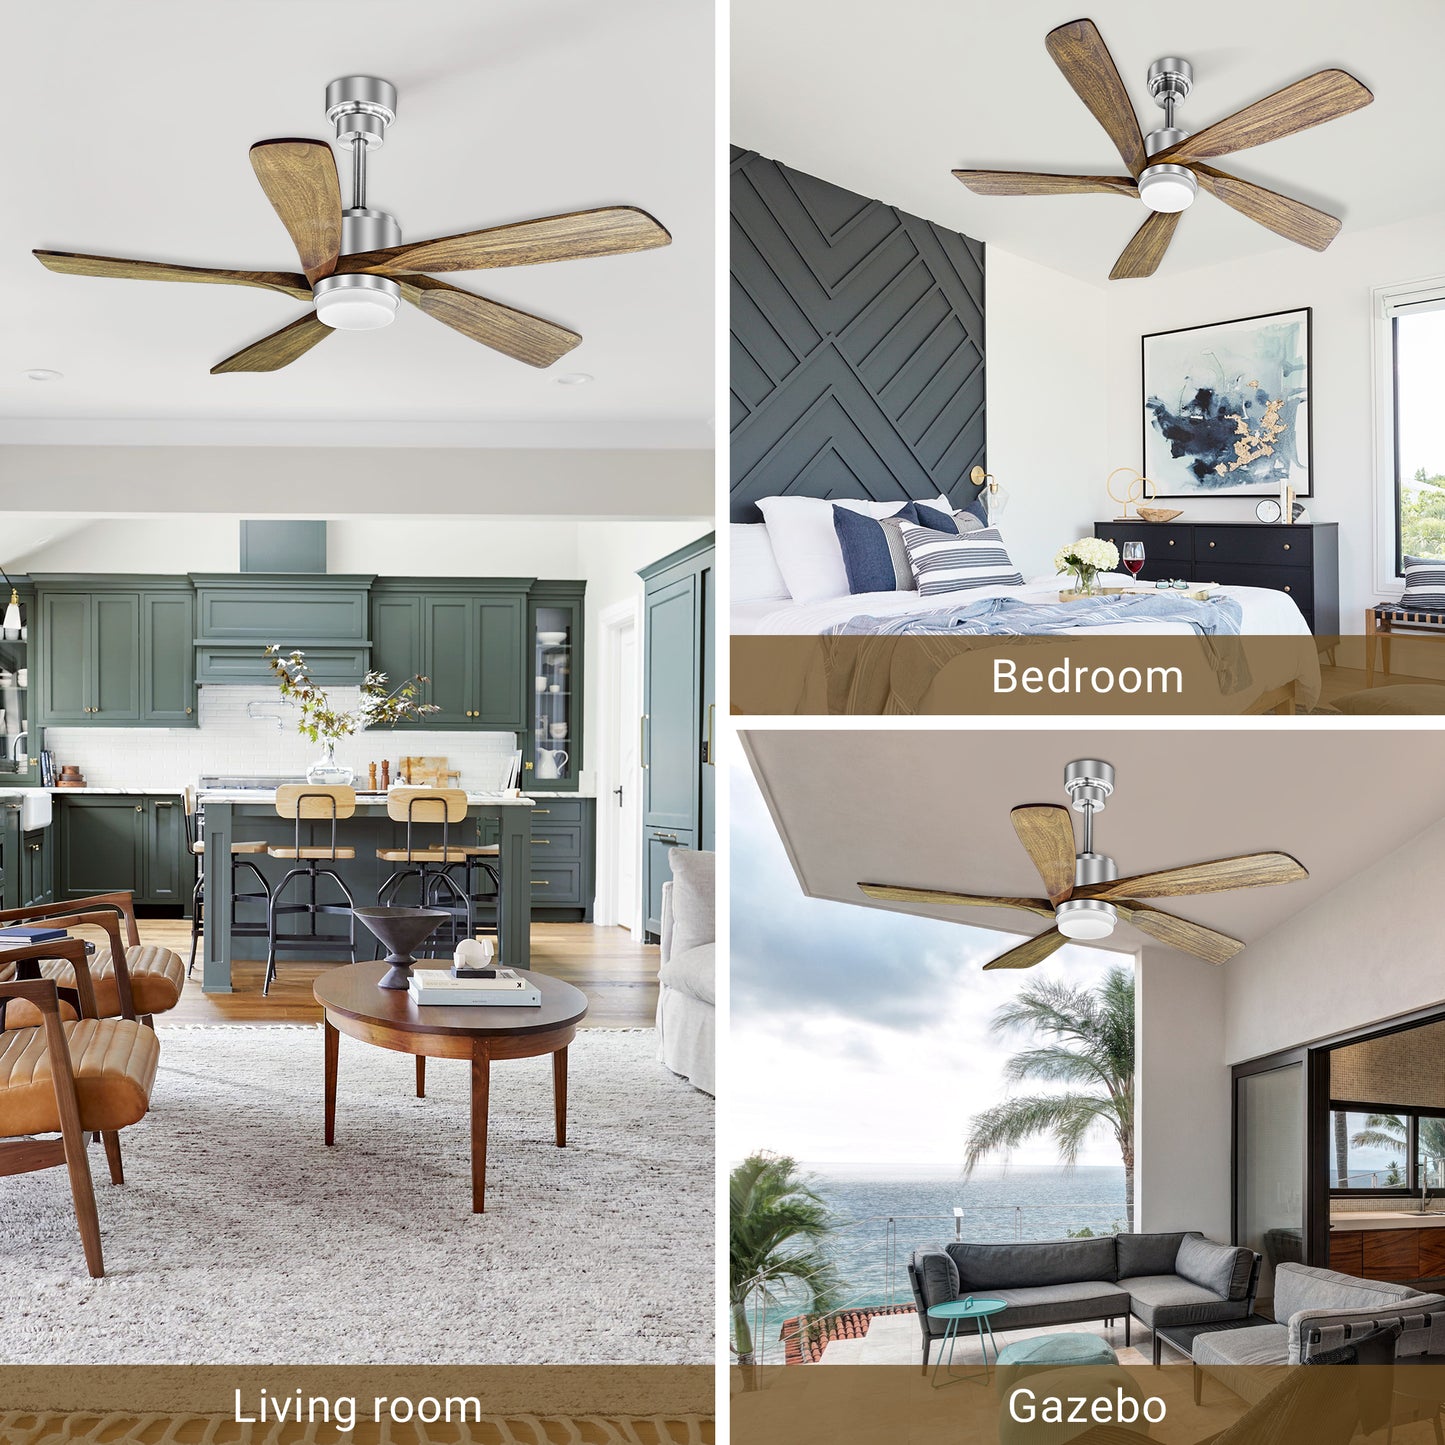 52 Inch Silver Low Profile Wood Ceiling Fan With Remote Control and Light, Reversible DC motor